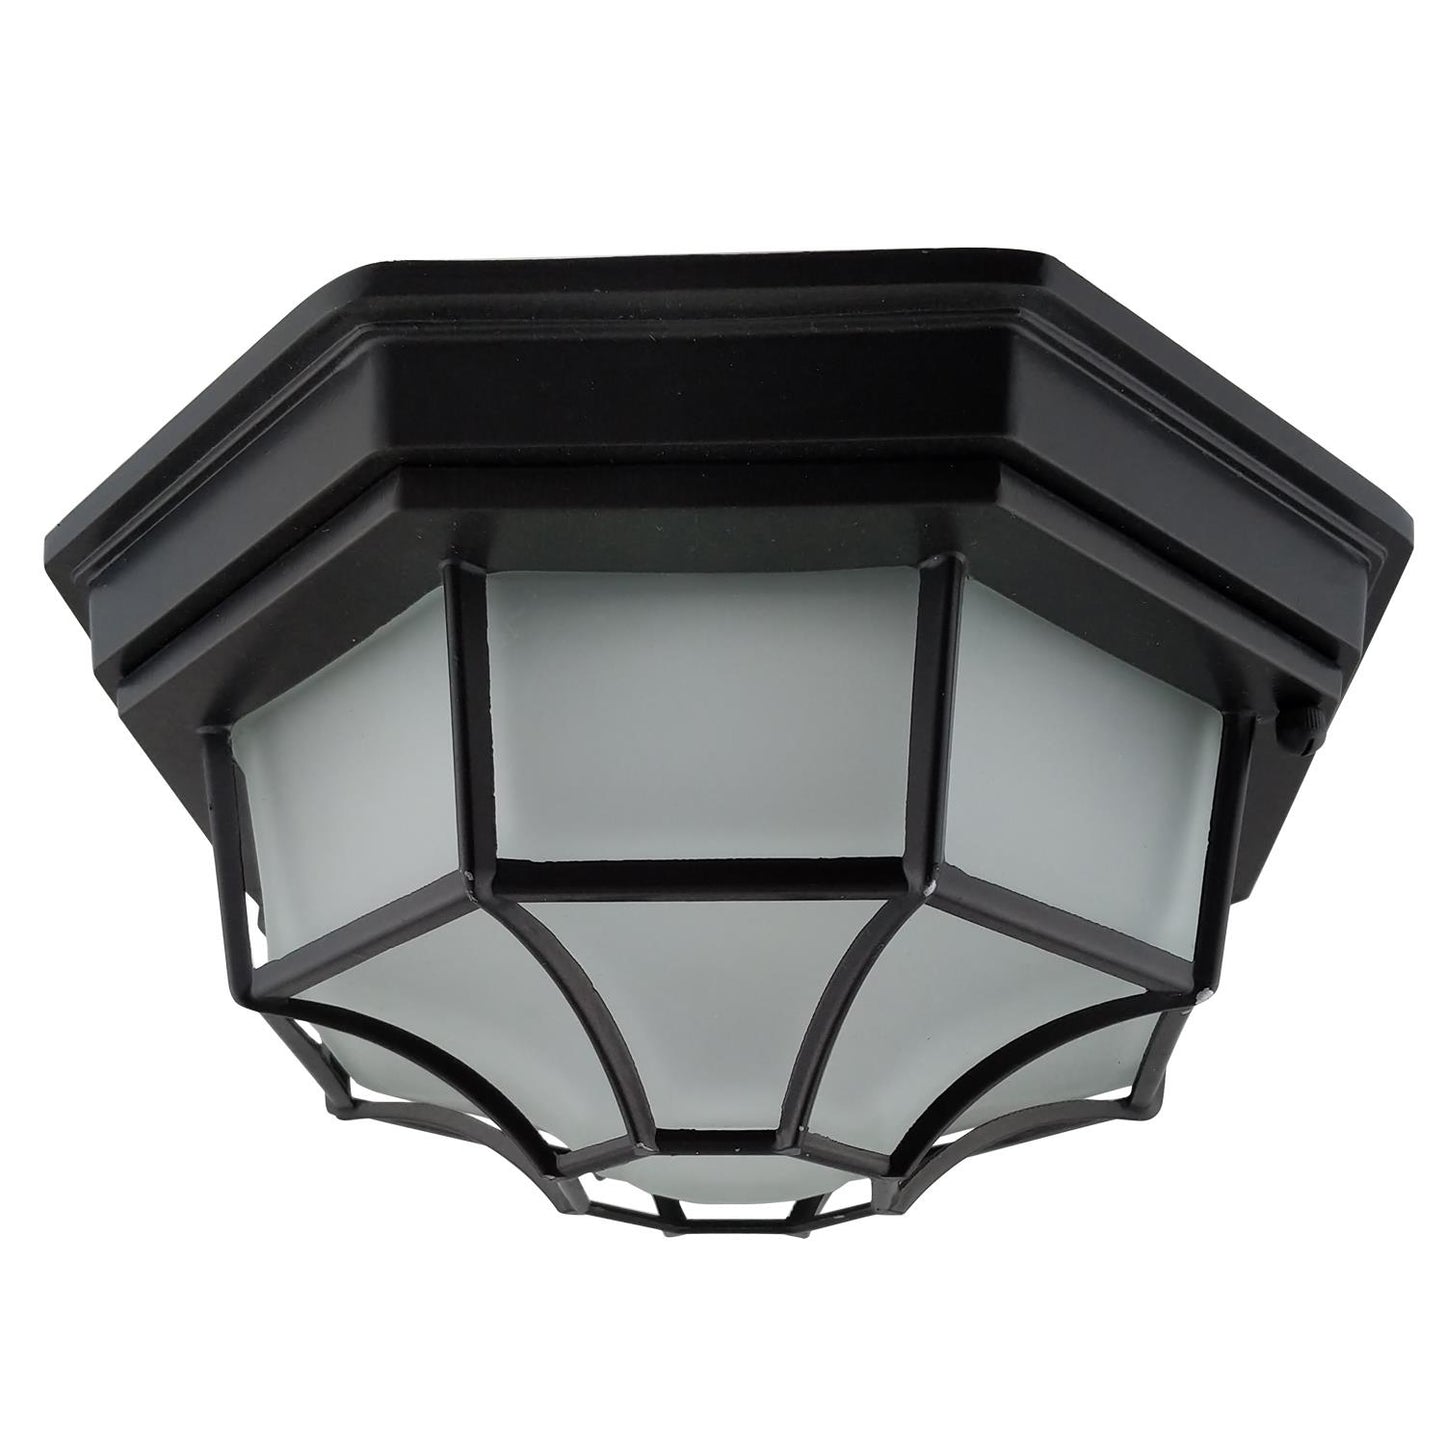 Sunlite 12" Octagon LED Decorative Outdoor Fixture, 17 Watts, 120 Volts, Dimmable, 800 Lumens, Matte Black Finish with Frosted Glass Lens, For Porches, Entryways, ETL Listed for Wet Location, 3000K Warm White